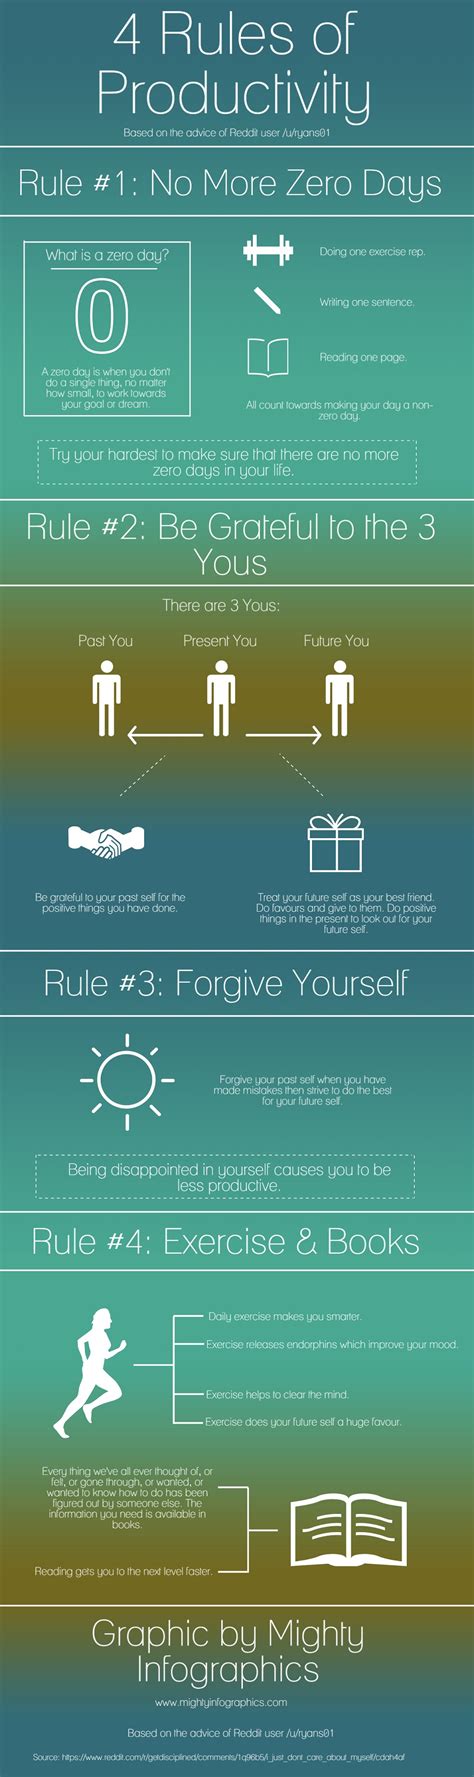 4 Rules Of Productivity By Reddit User Ryans01 Mighty Infographics